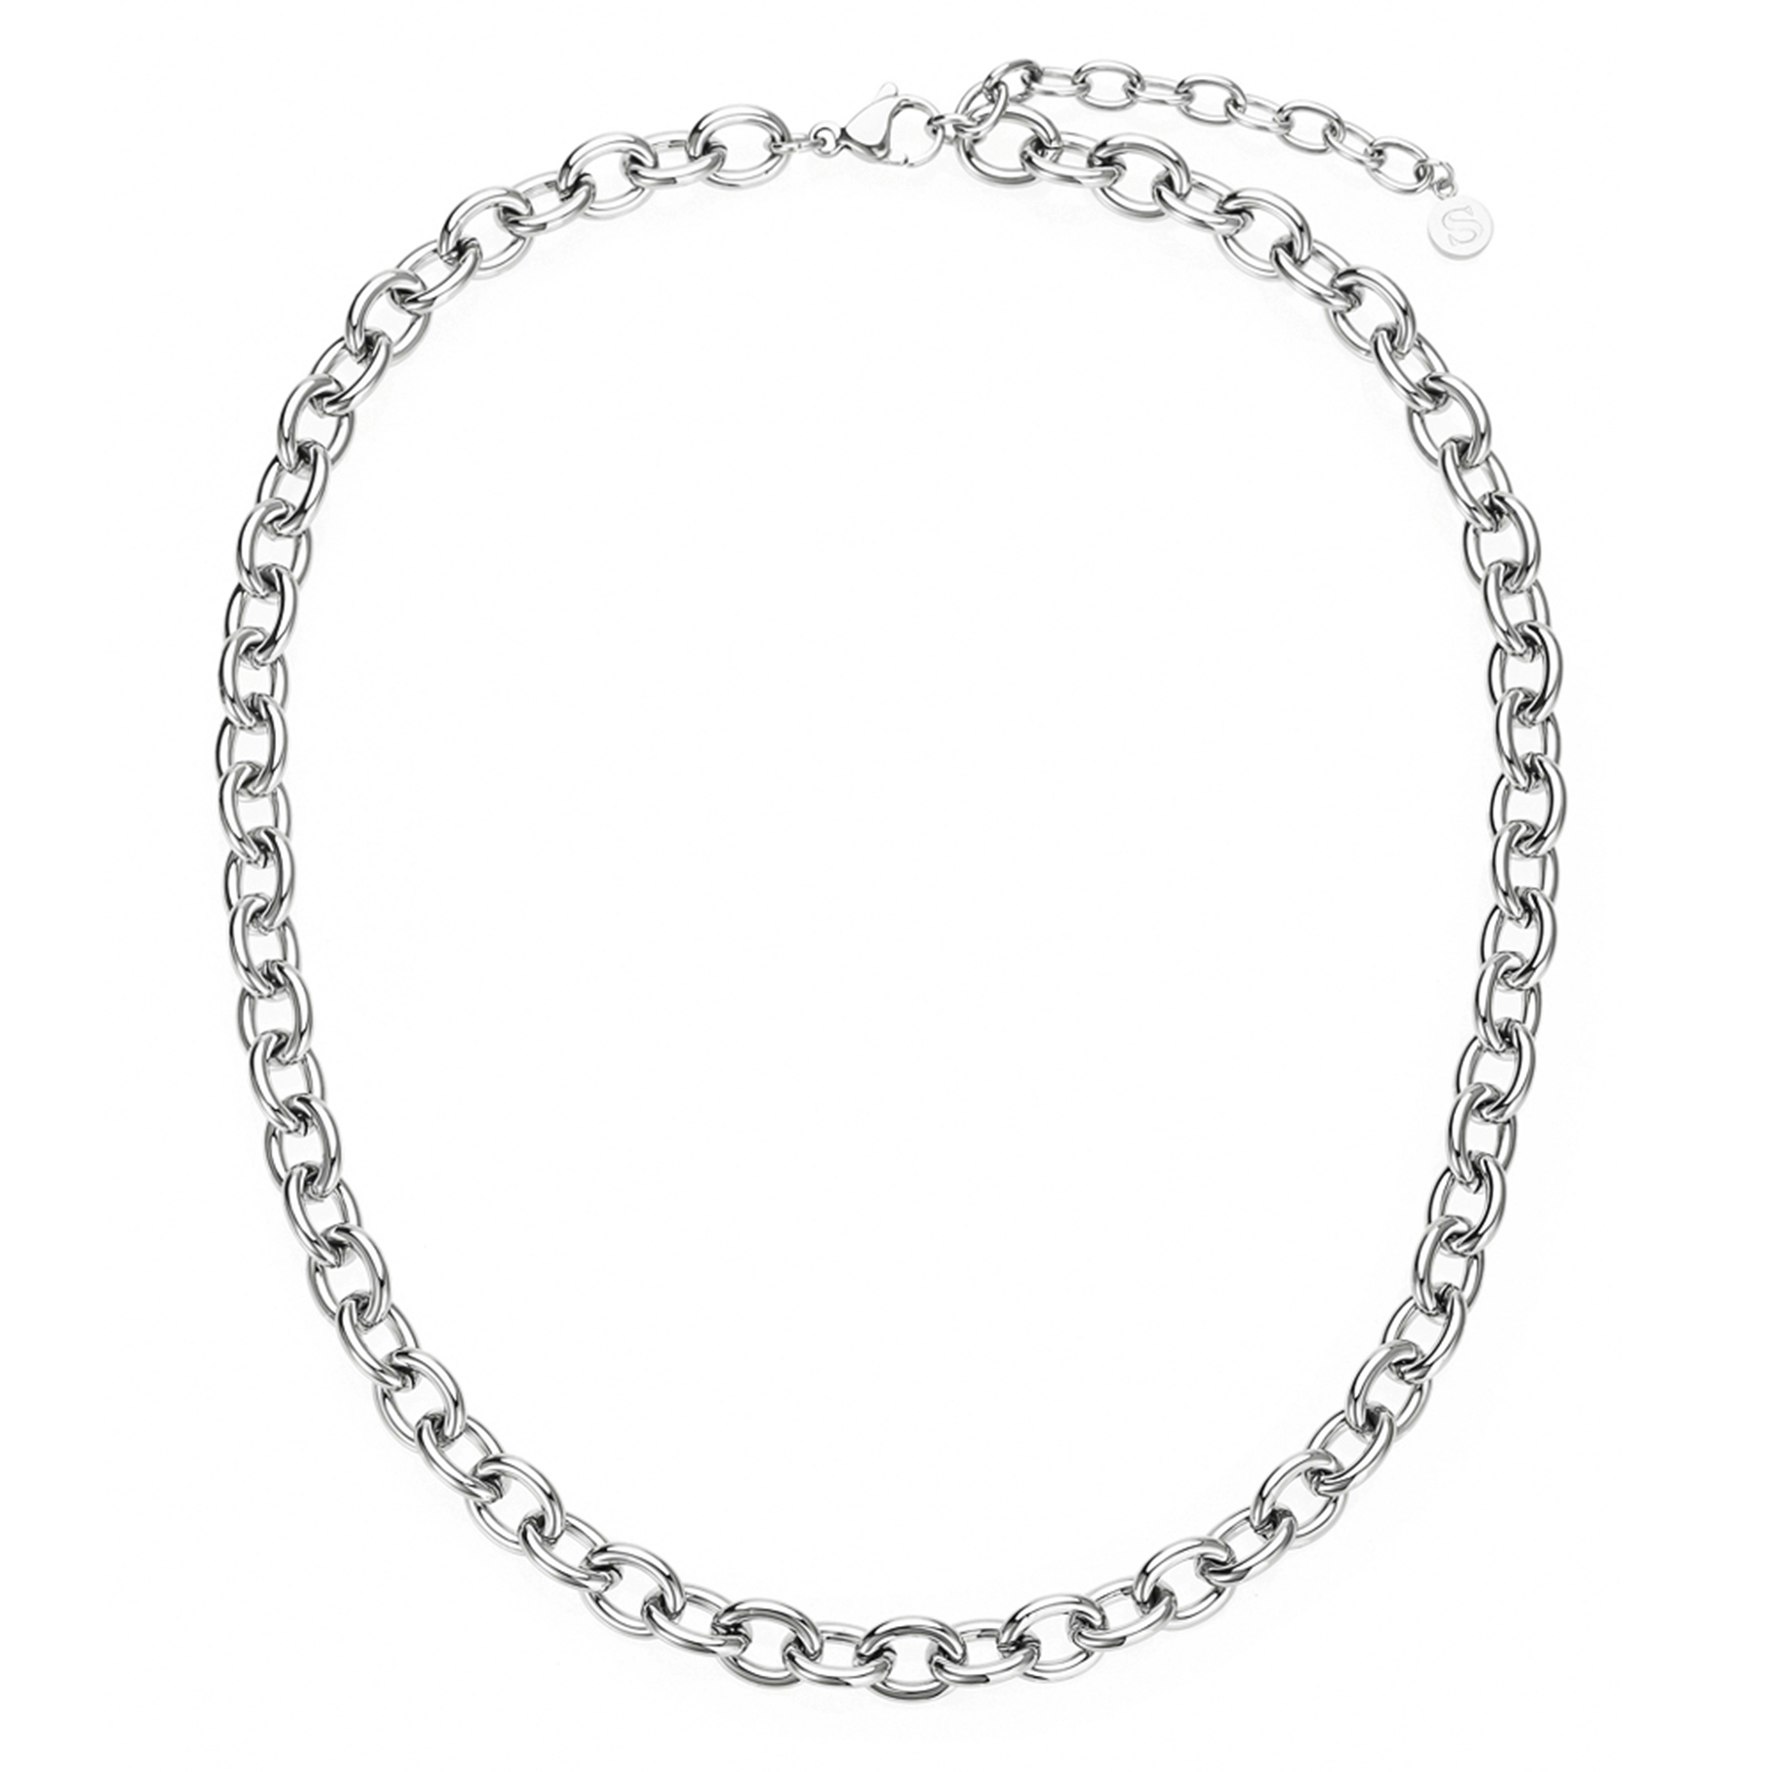 Clara Necklace from Sistie 2nd in Stainless steel